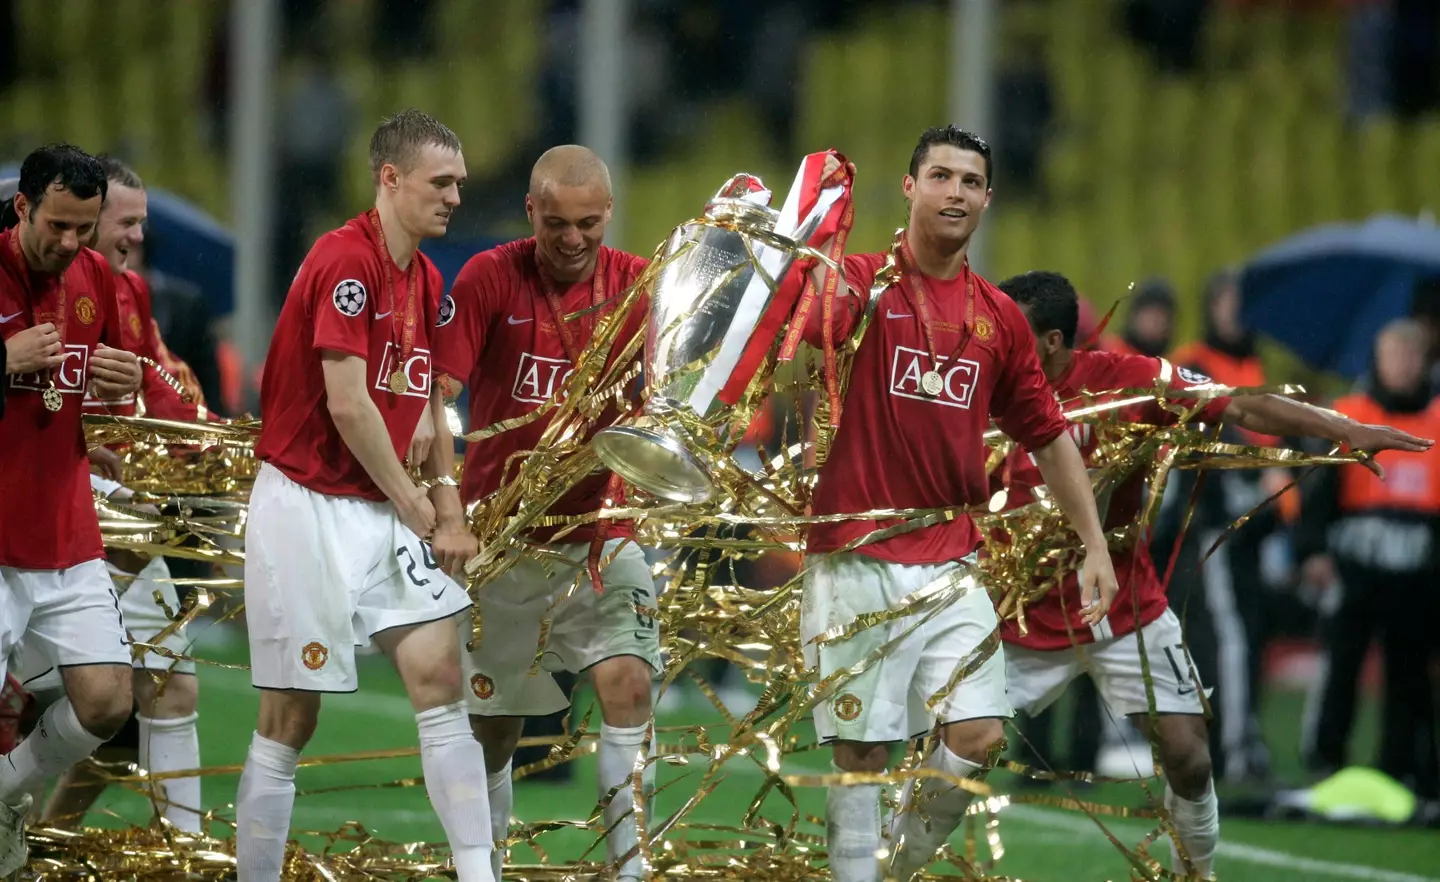 If Ronaldo gets his hands on the trophy again it could mean trouble for Arsenal or Spurs. Image: PA Images